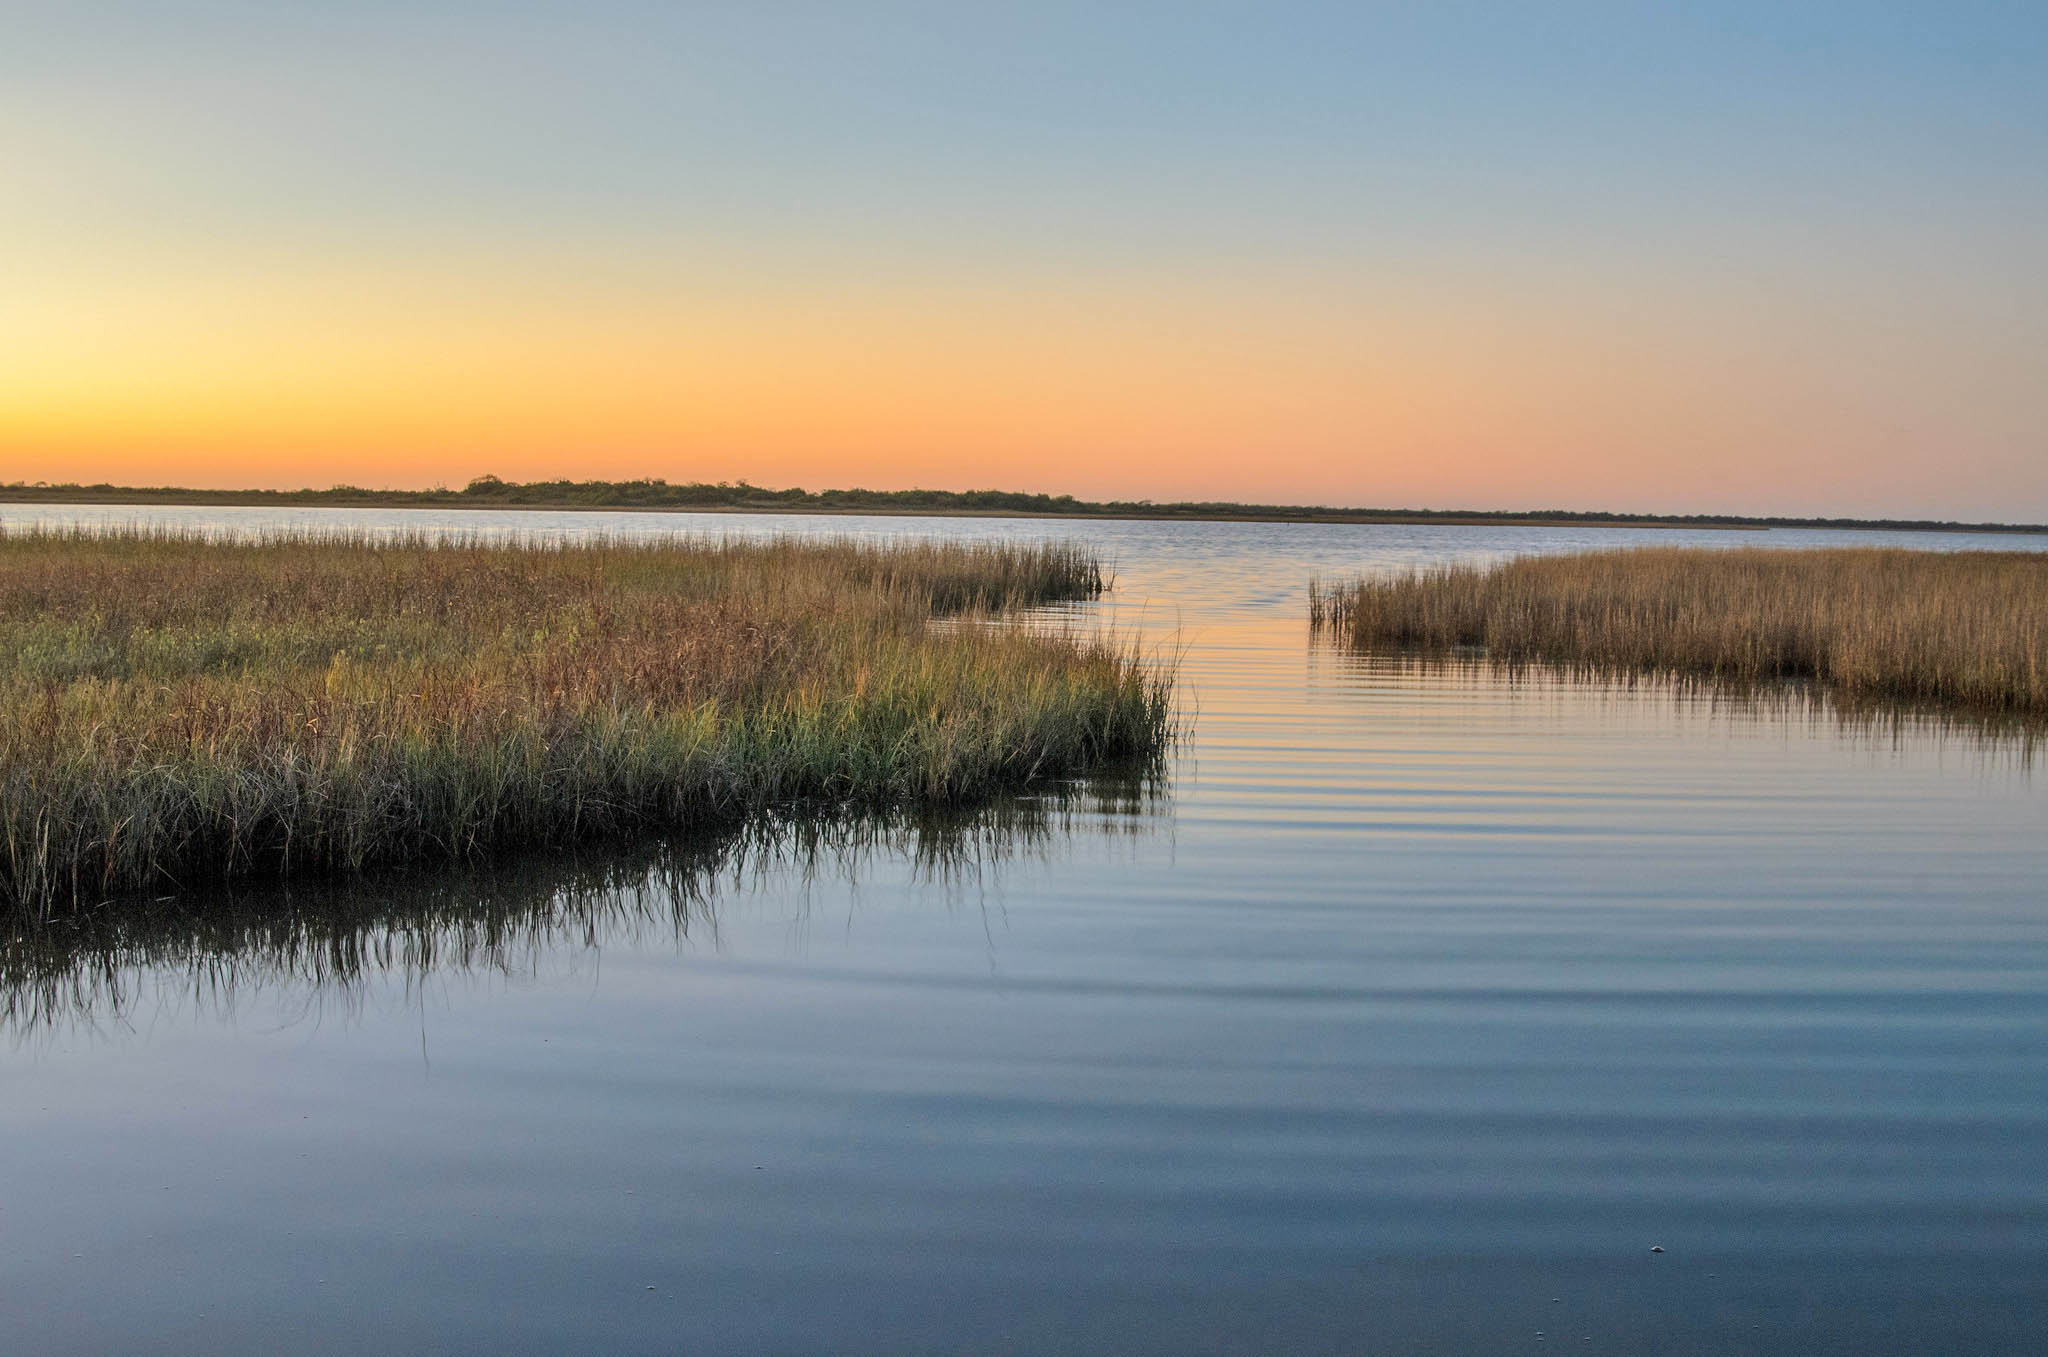 An expanse of dense coastal wetlands intermixed with open water along the Texas Gulf Coast at sunset; the sky is orange.